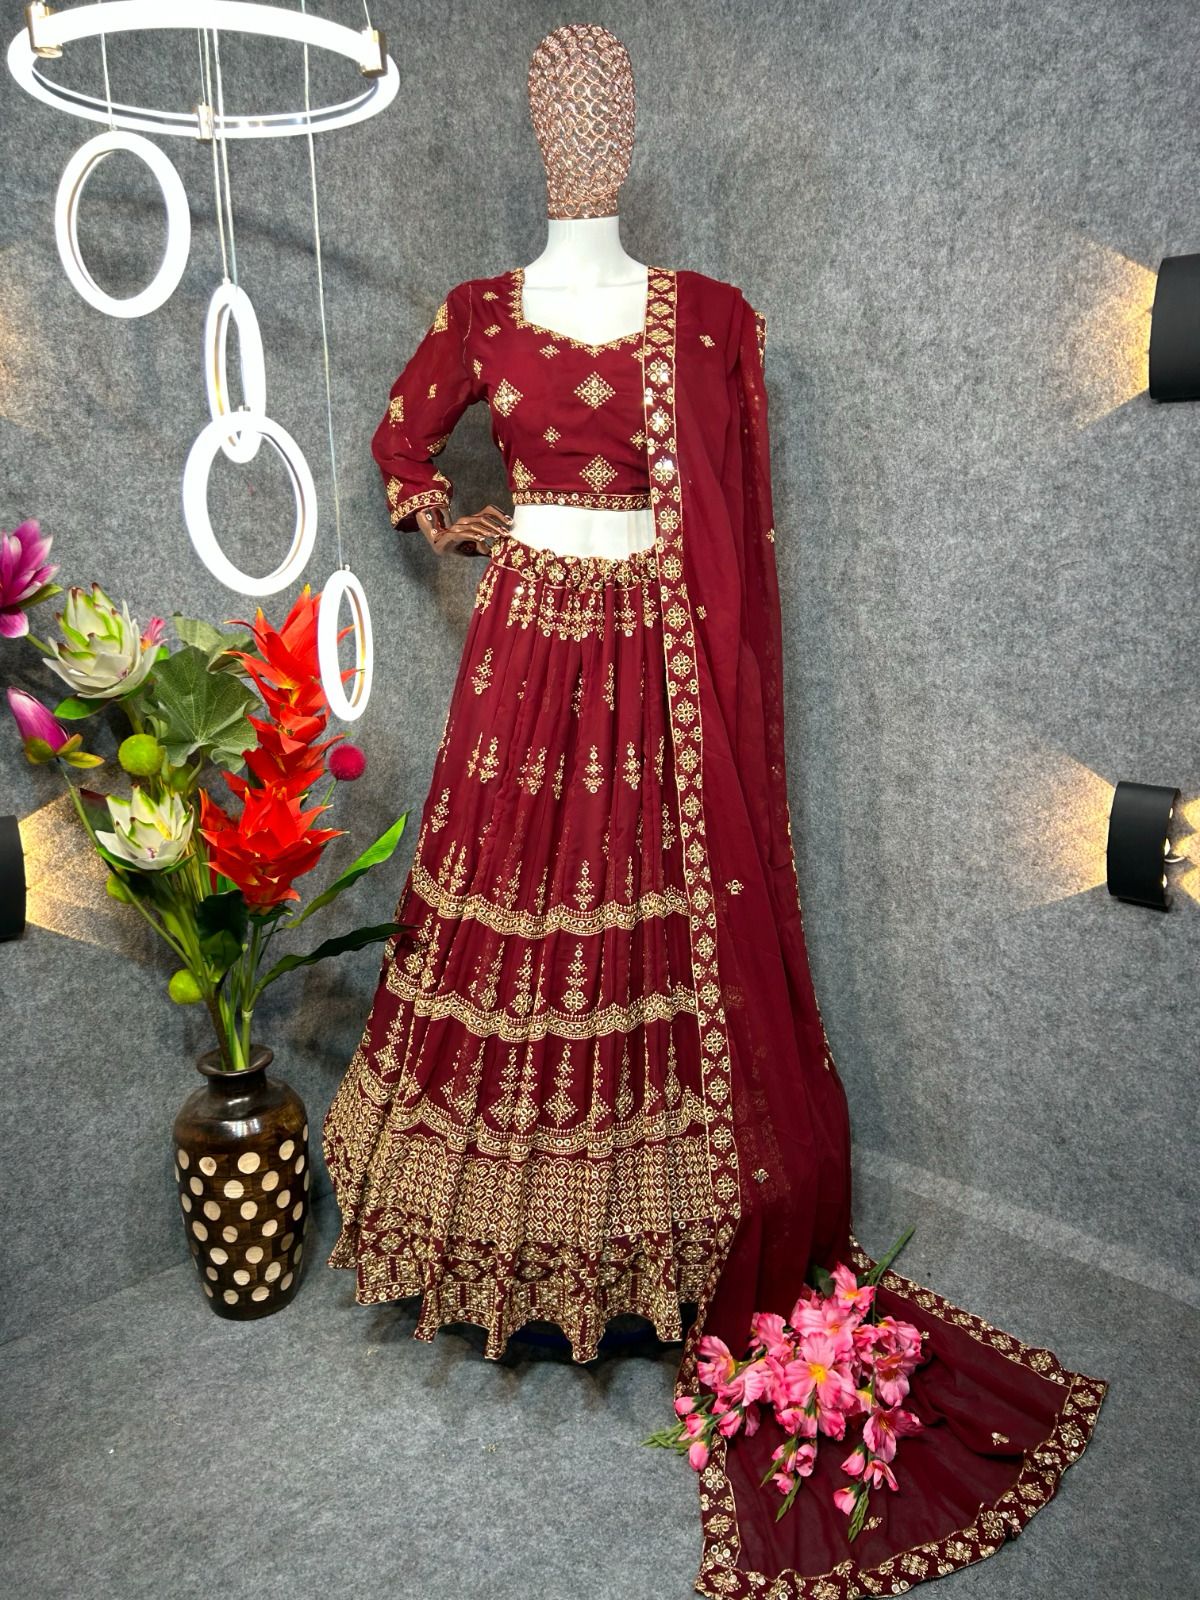 Fabulous Red Colored Embroidered Lehenga In Chandler